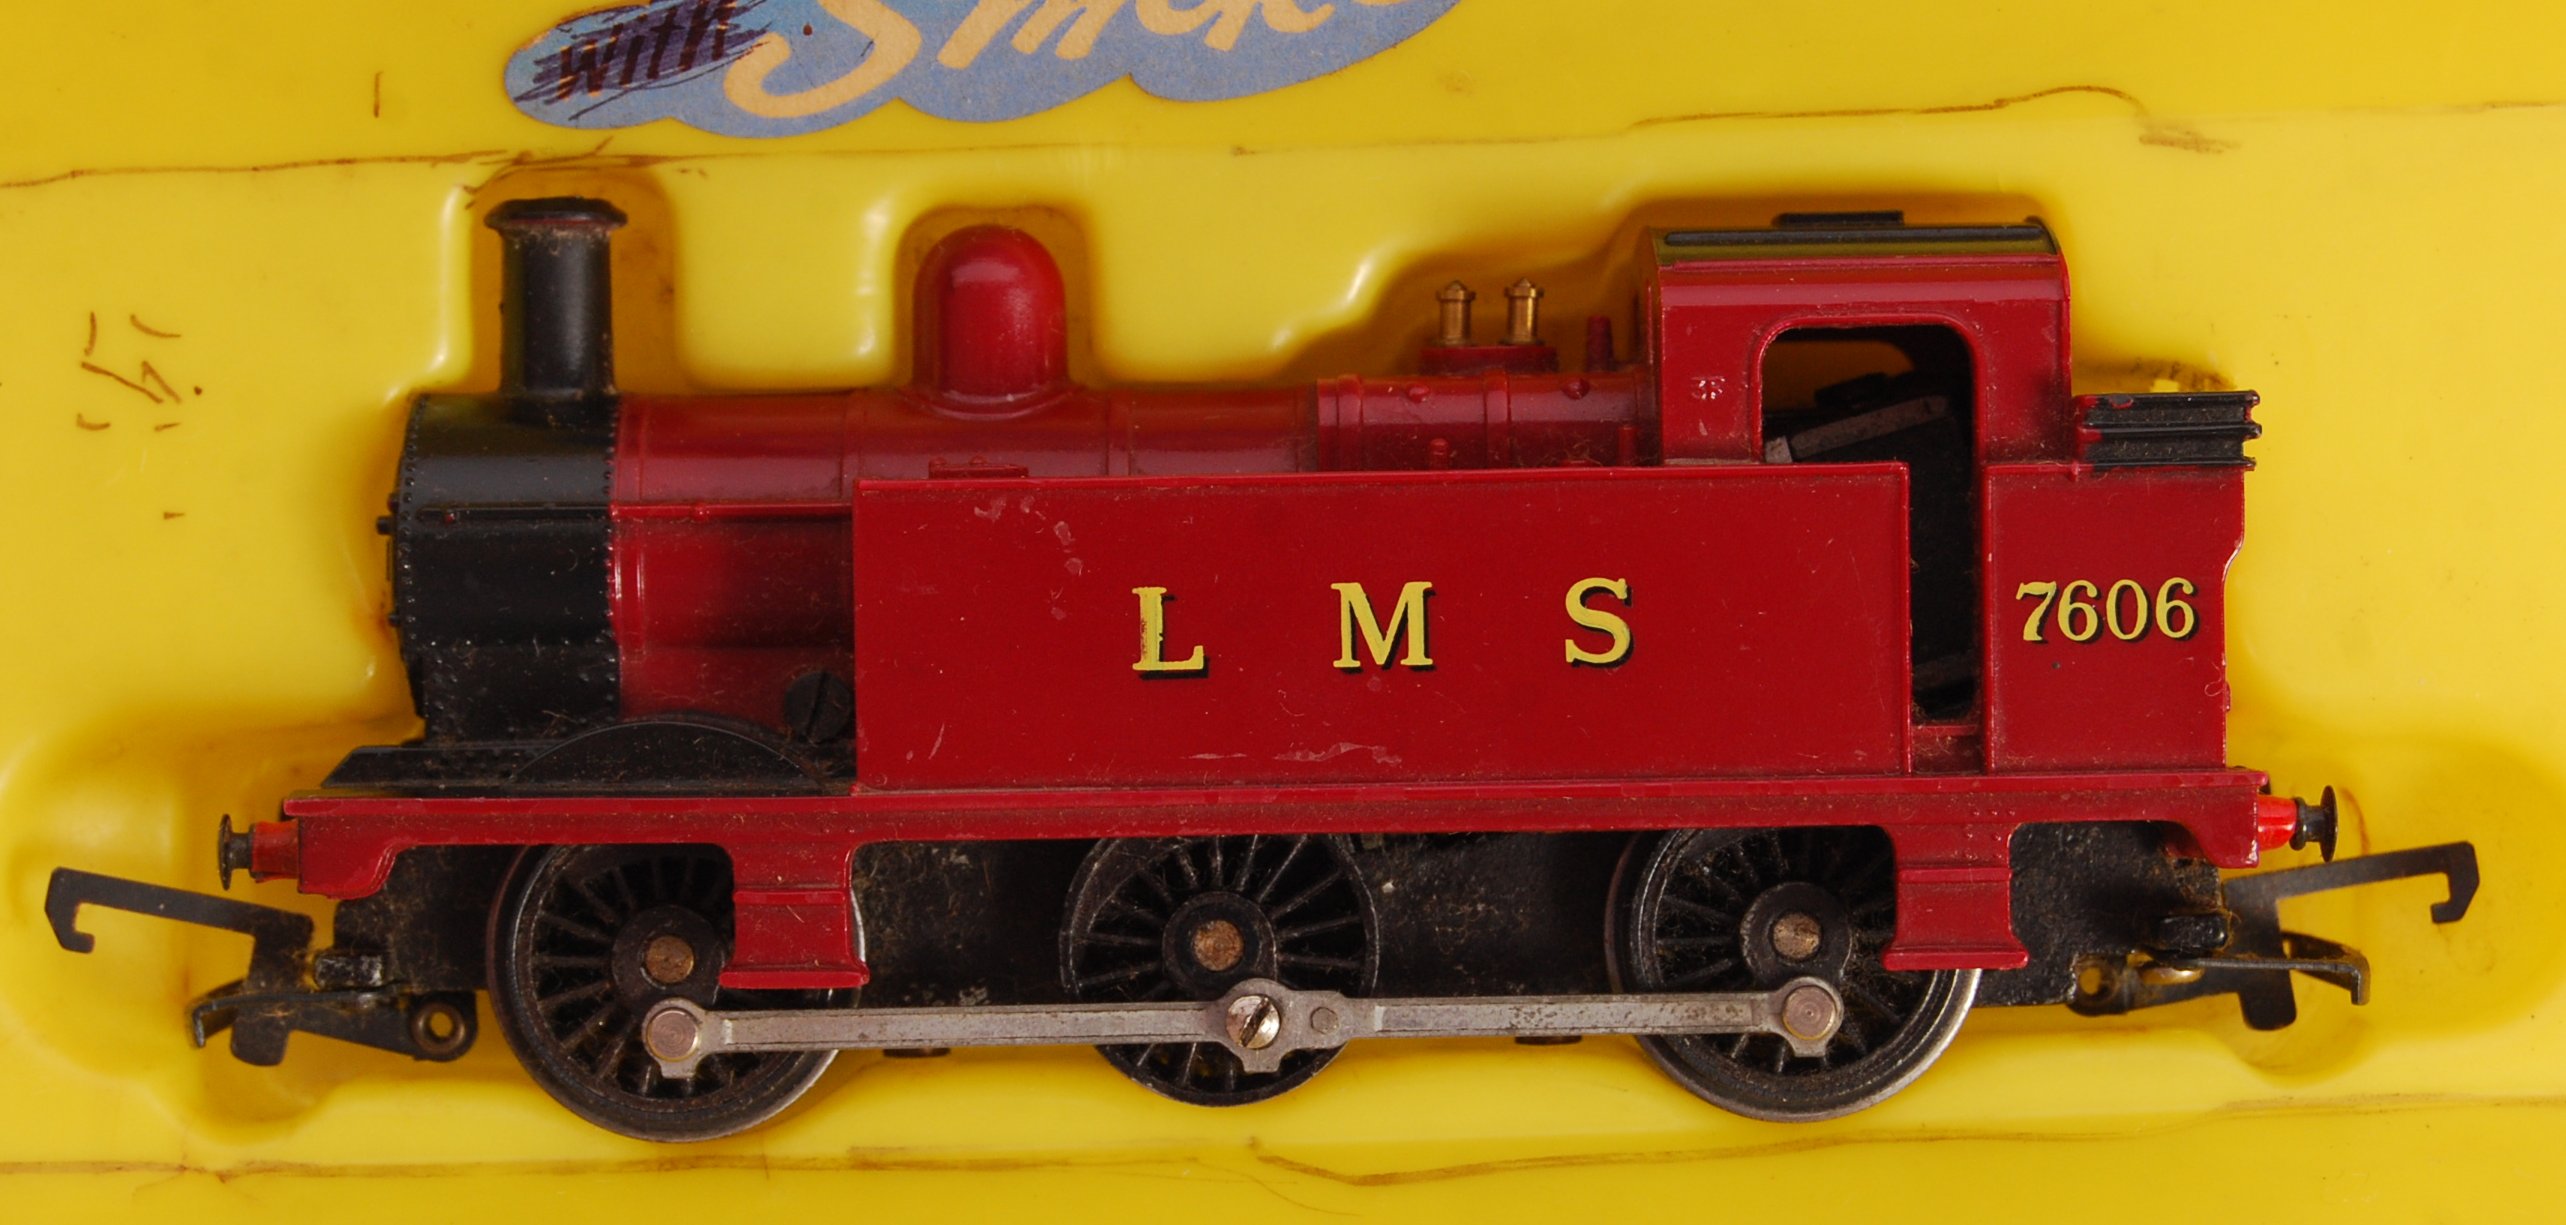 COLLECTION OF HORNBY 00 GAUGE RAILWAY TRAINSET LOCOMOTIVES - Image 4 of 4